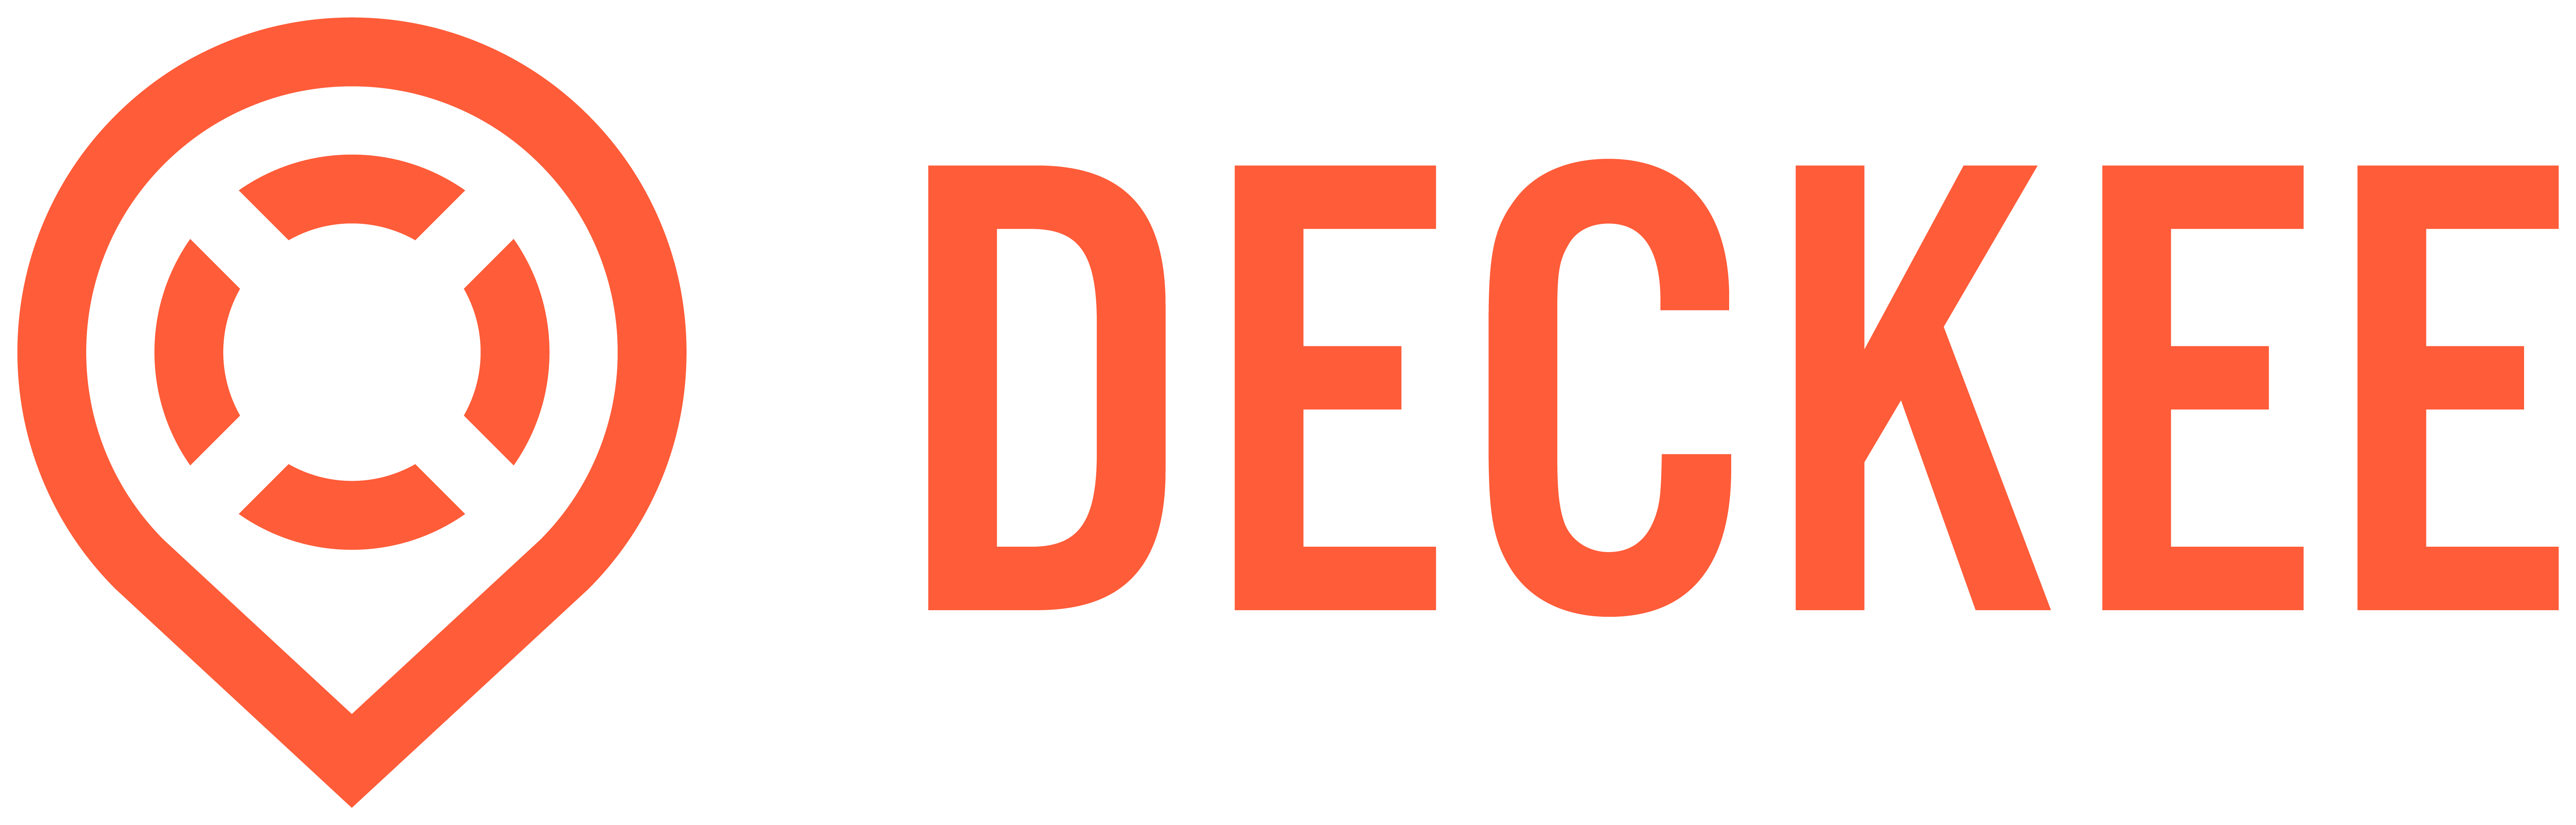 The logo for Deckee, which features bright orange text that says 'DECKEE' to the right of a bright orange map pin outline with a buoy inside